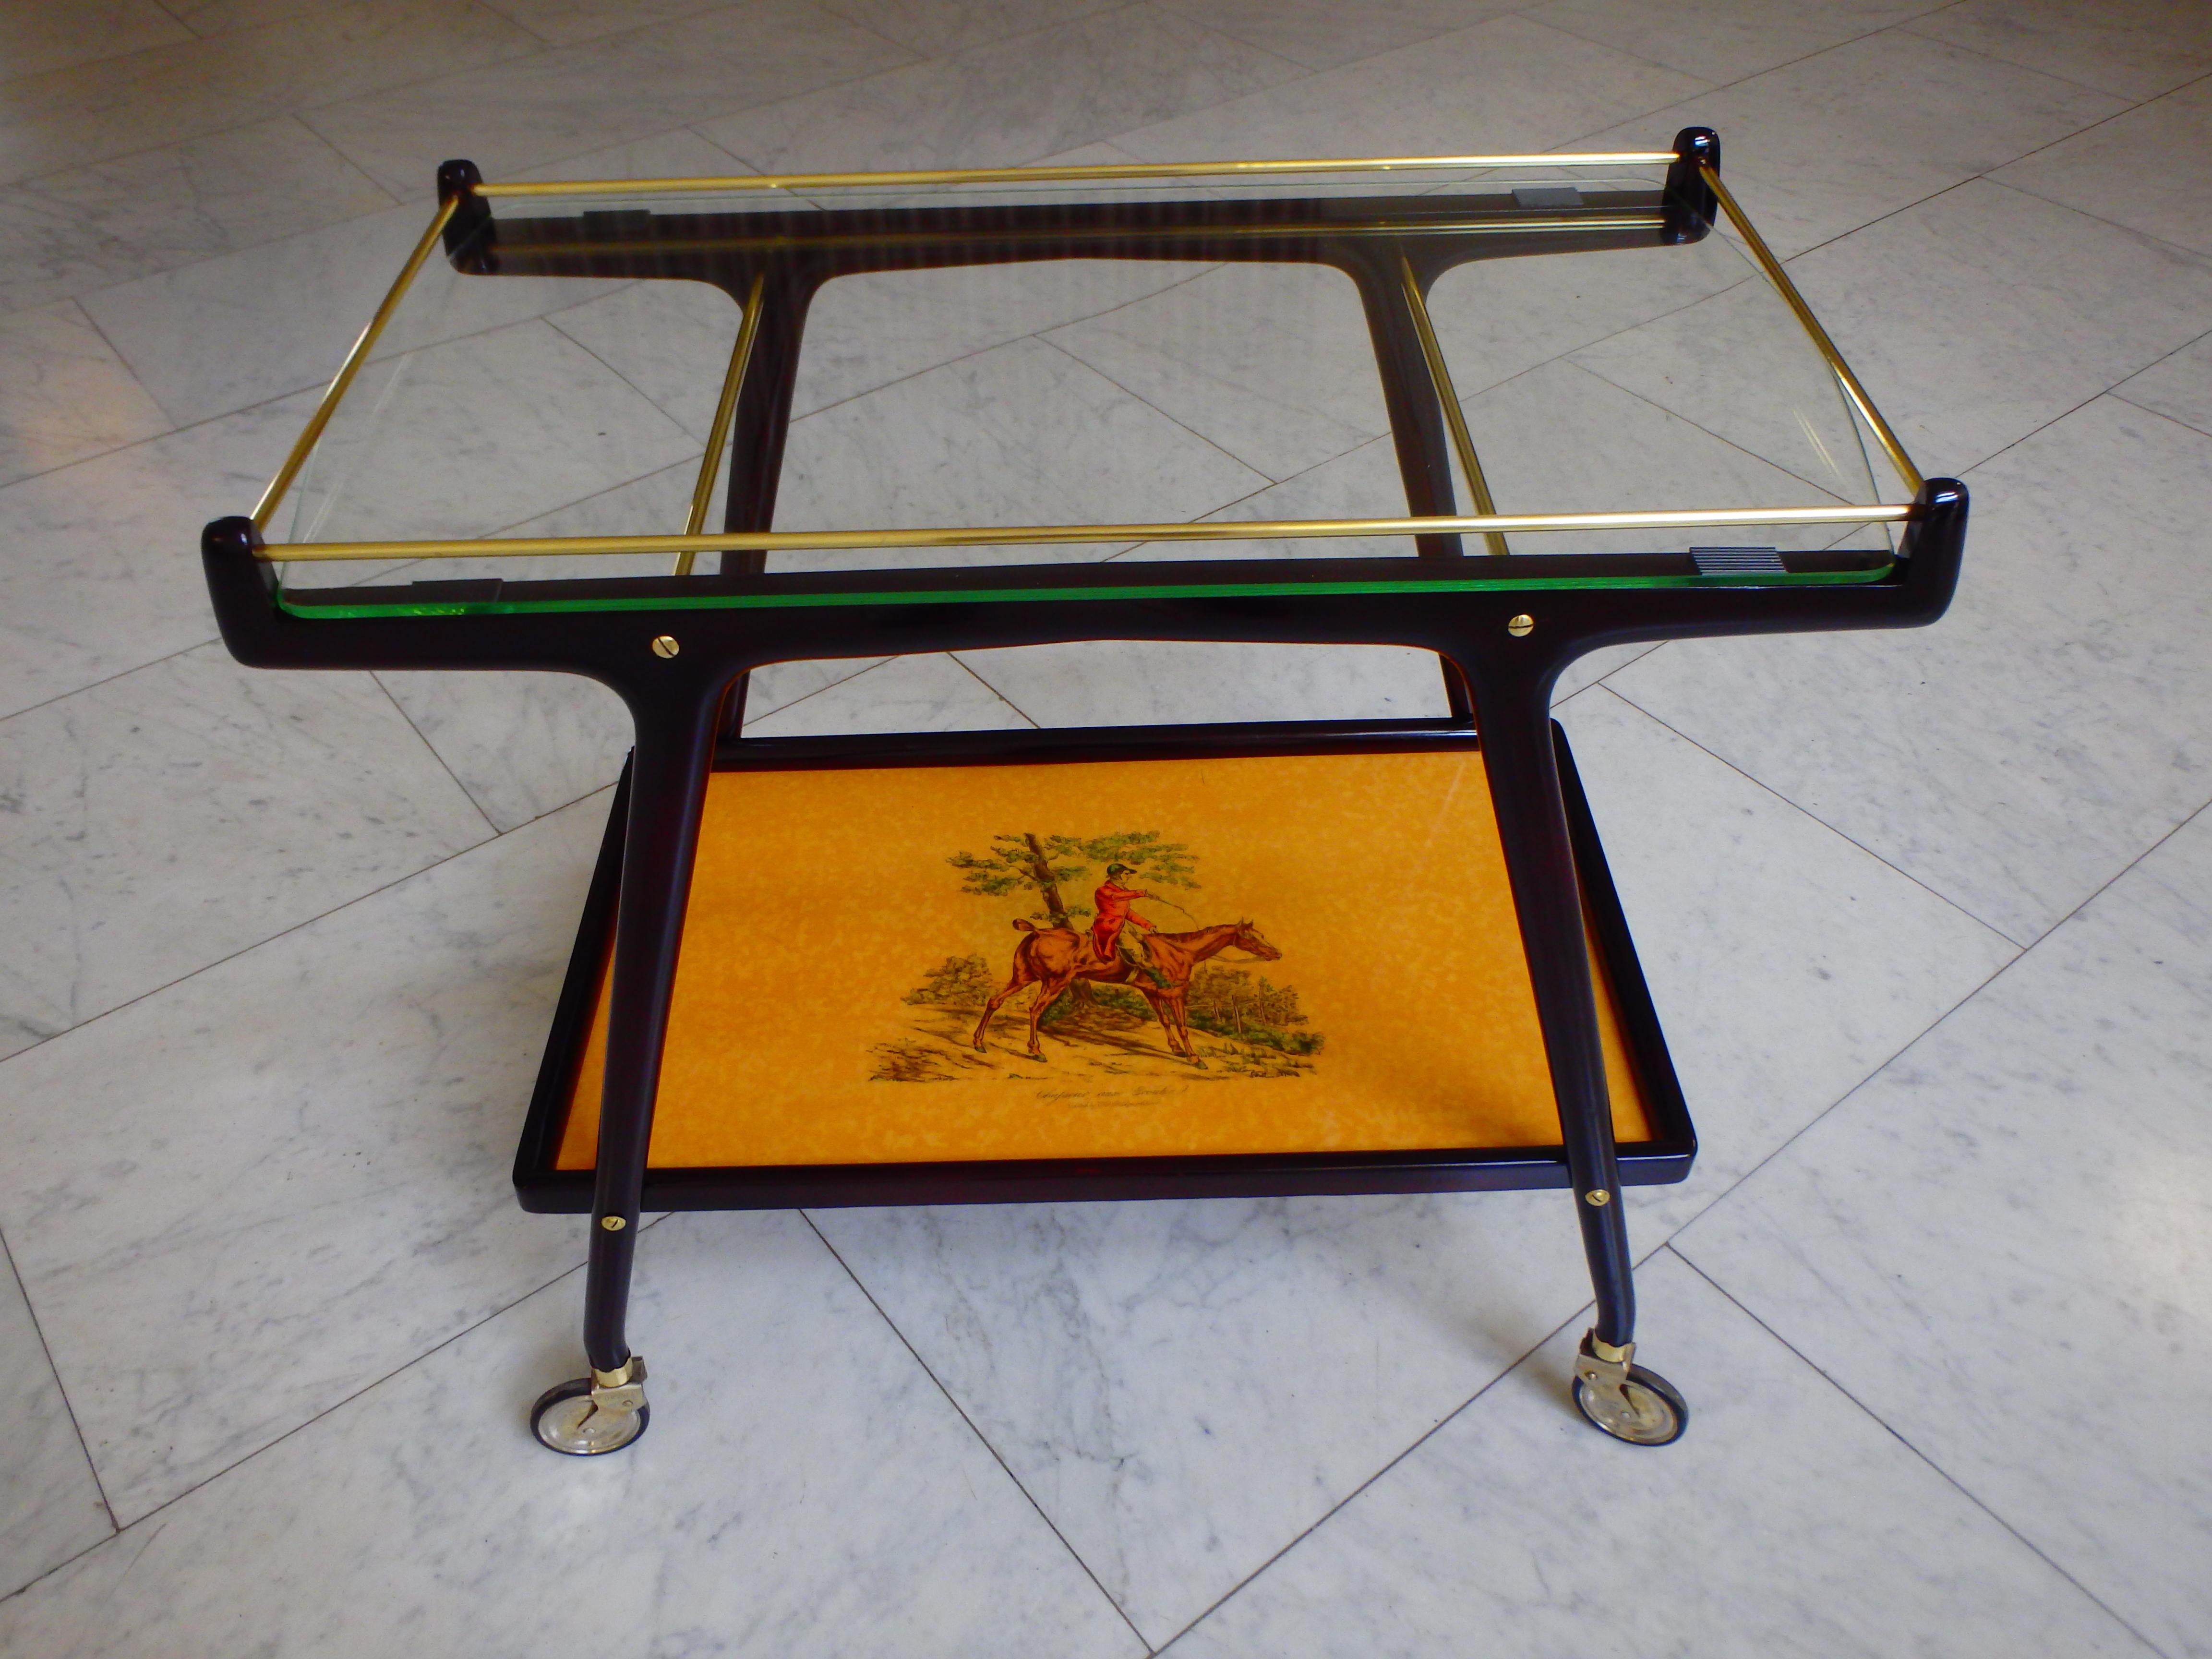 Italian Ico Parisi bar cart with glass top and chase scene.